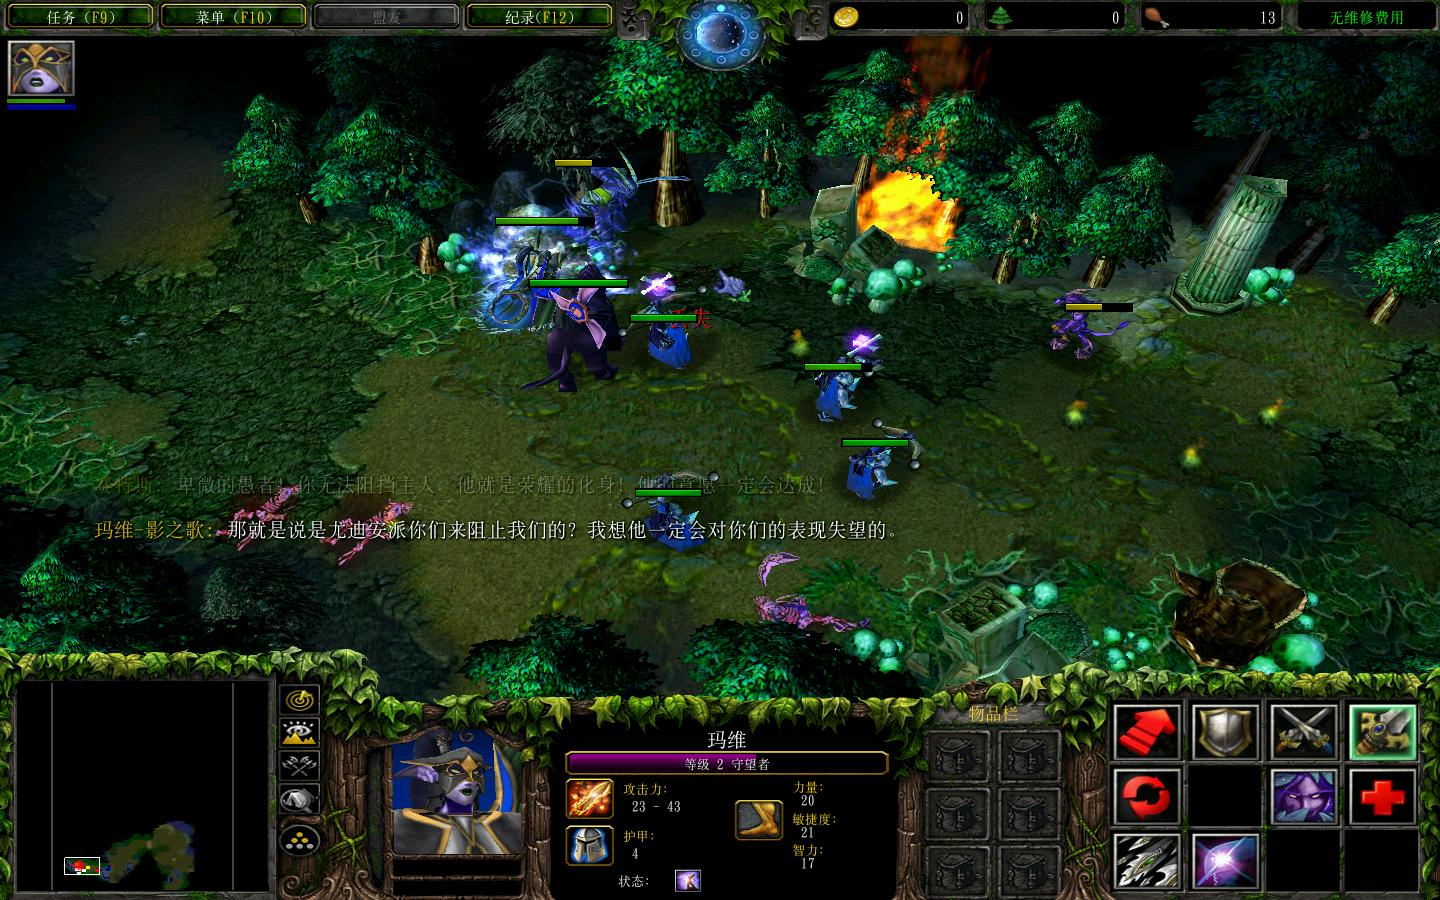 ħ3Warcraft III The Frozen Thronev1.24Lost Temple